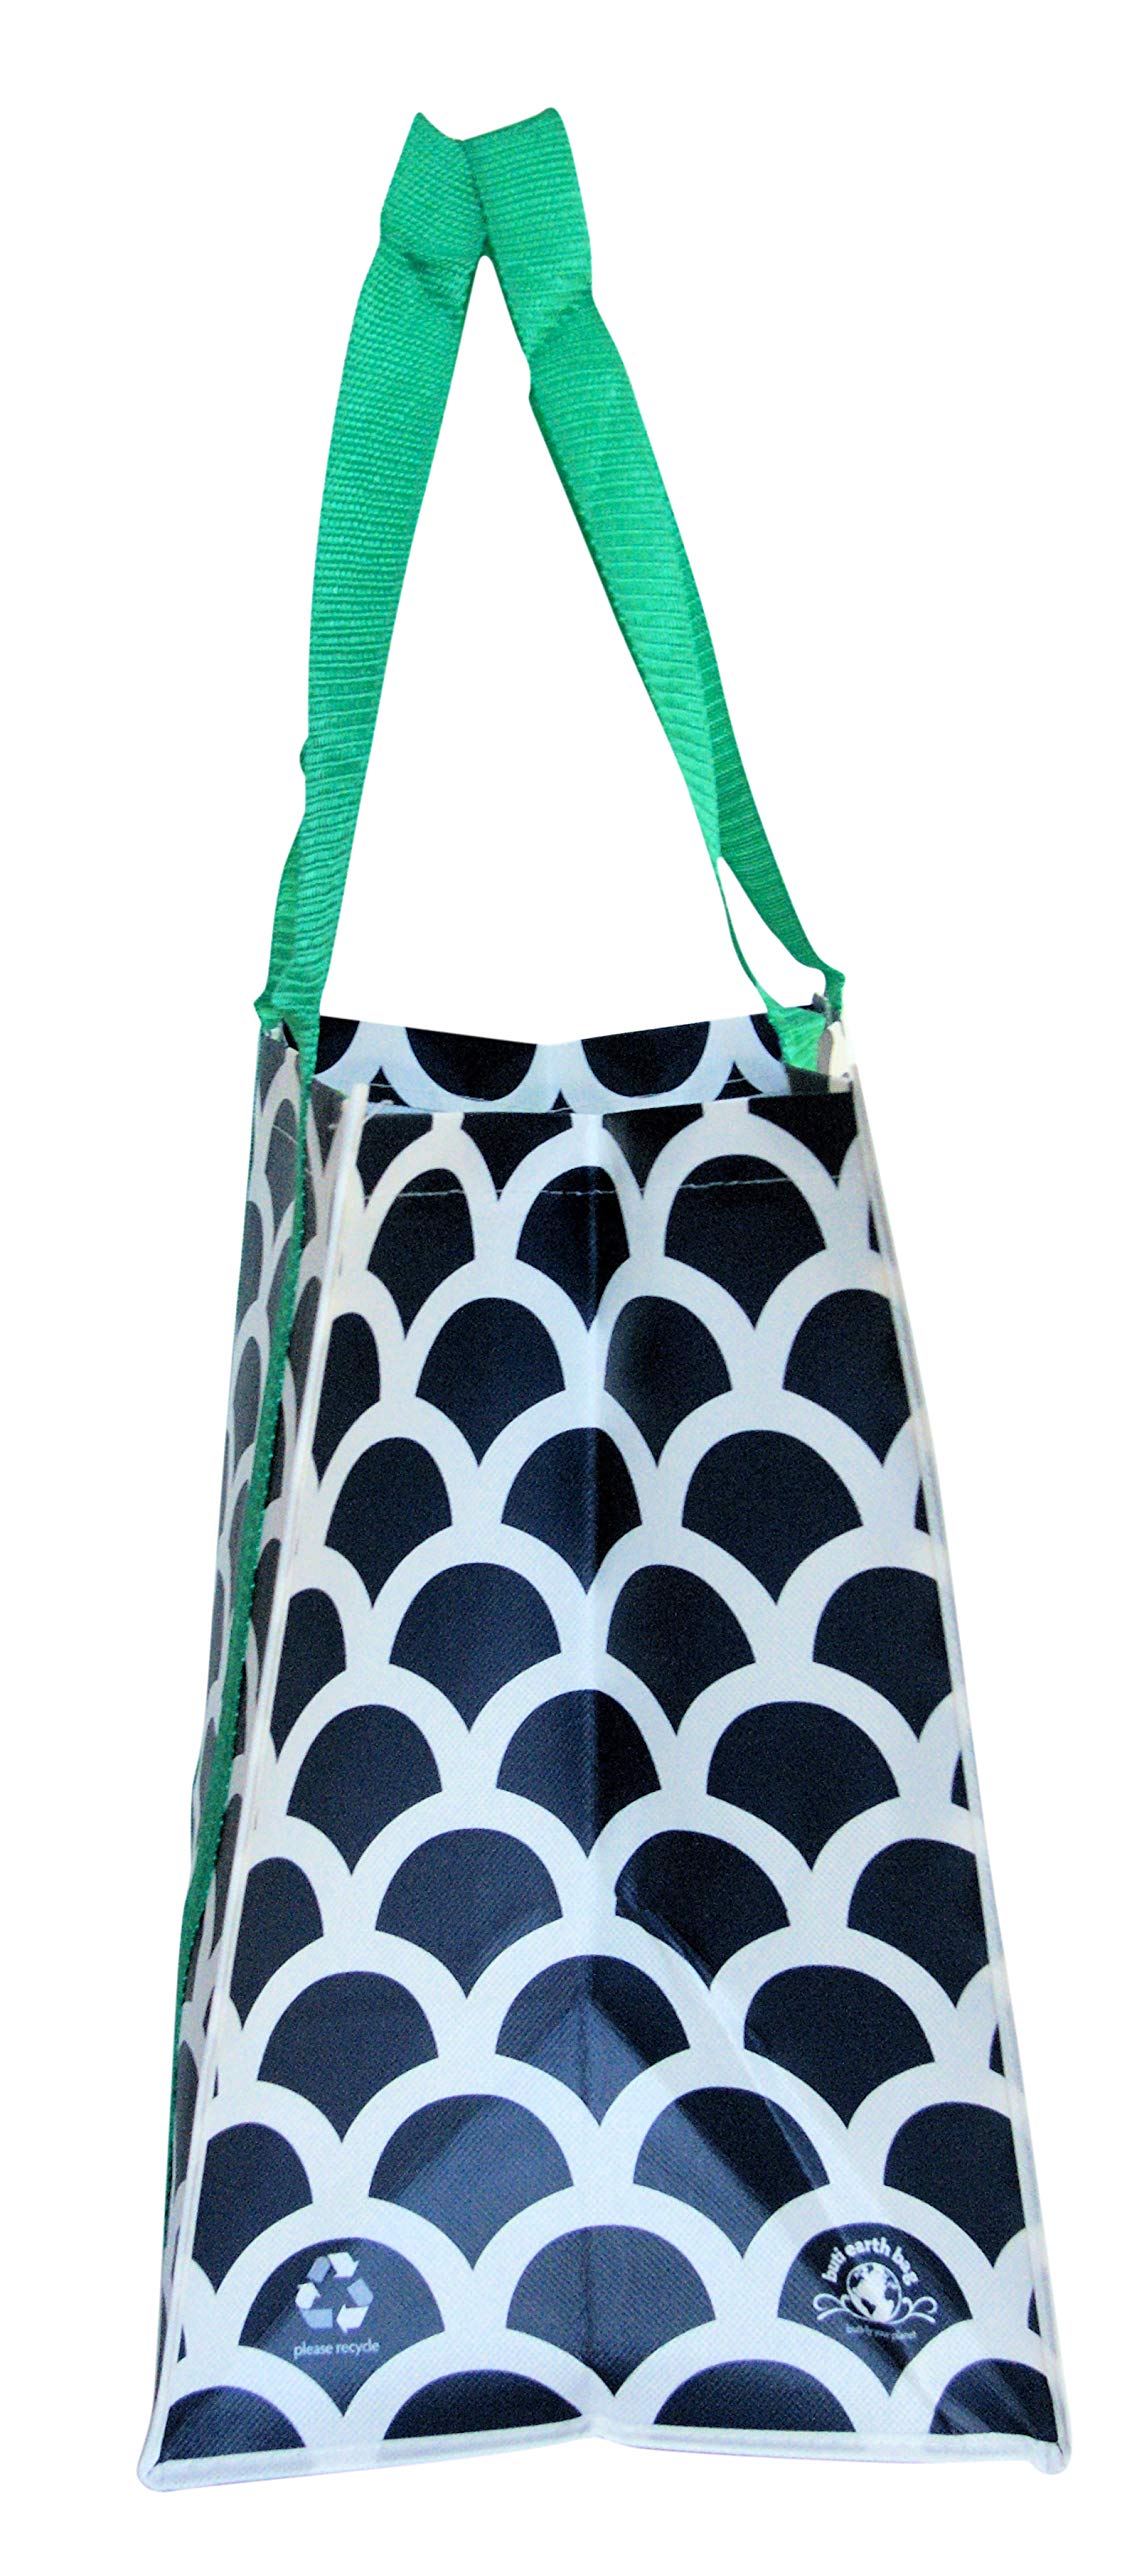 the buti-bag company Extra Large Reusable Shopping Bags Stay Open Premium Wipe Clean (2, Navy Green)